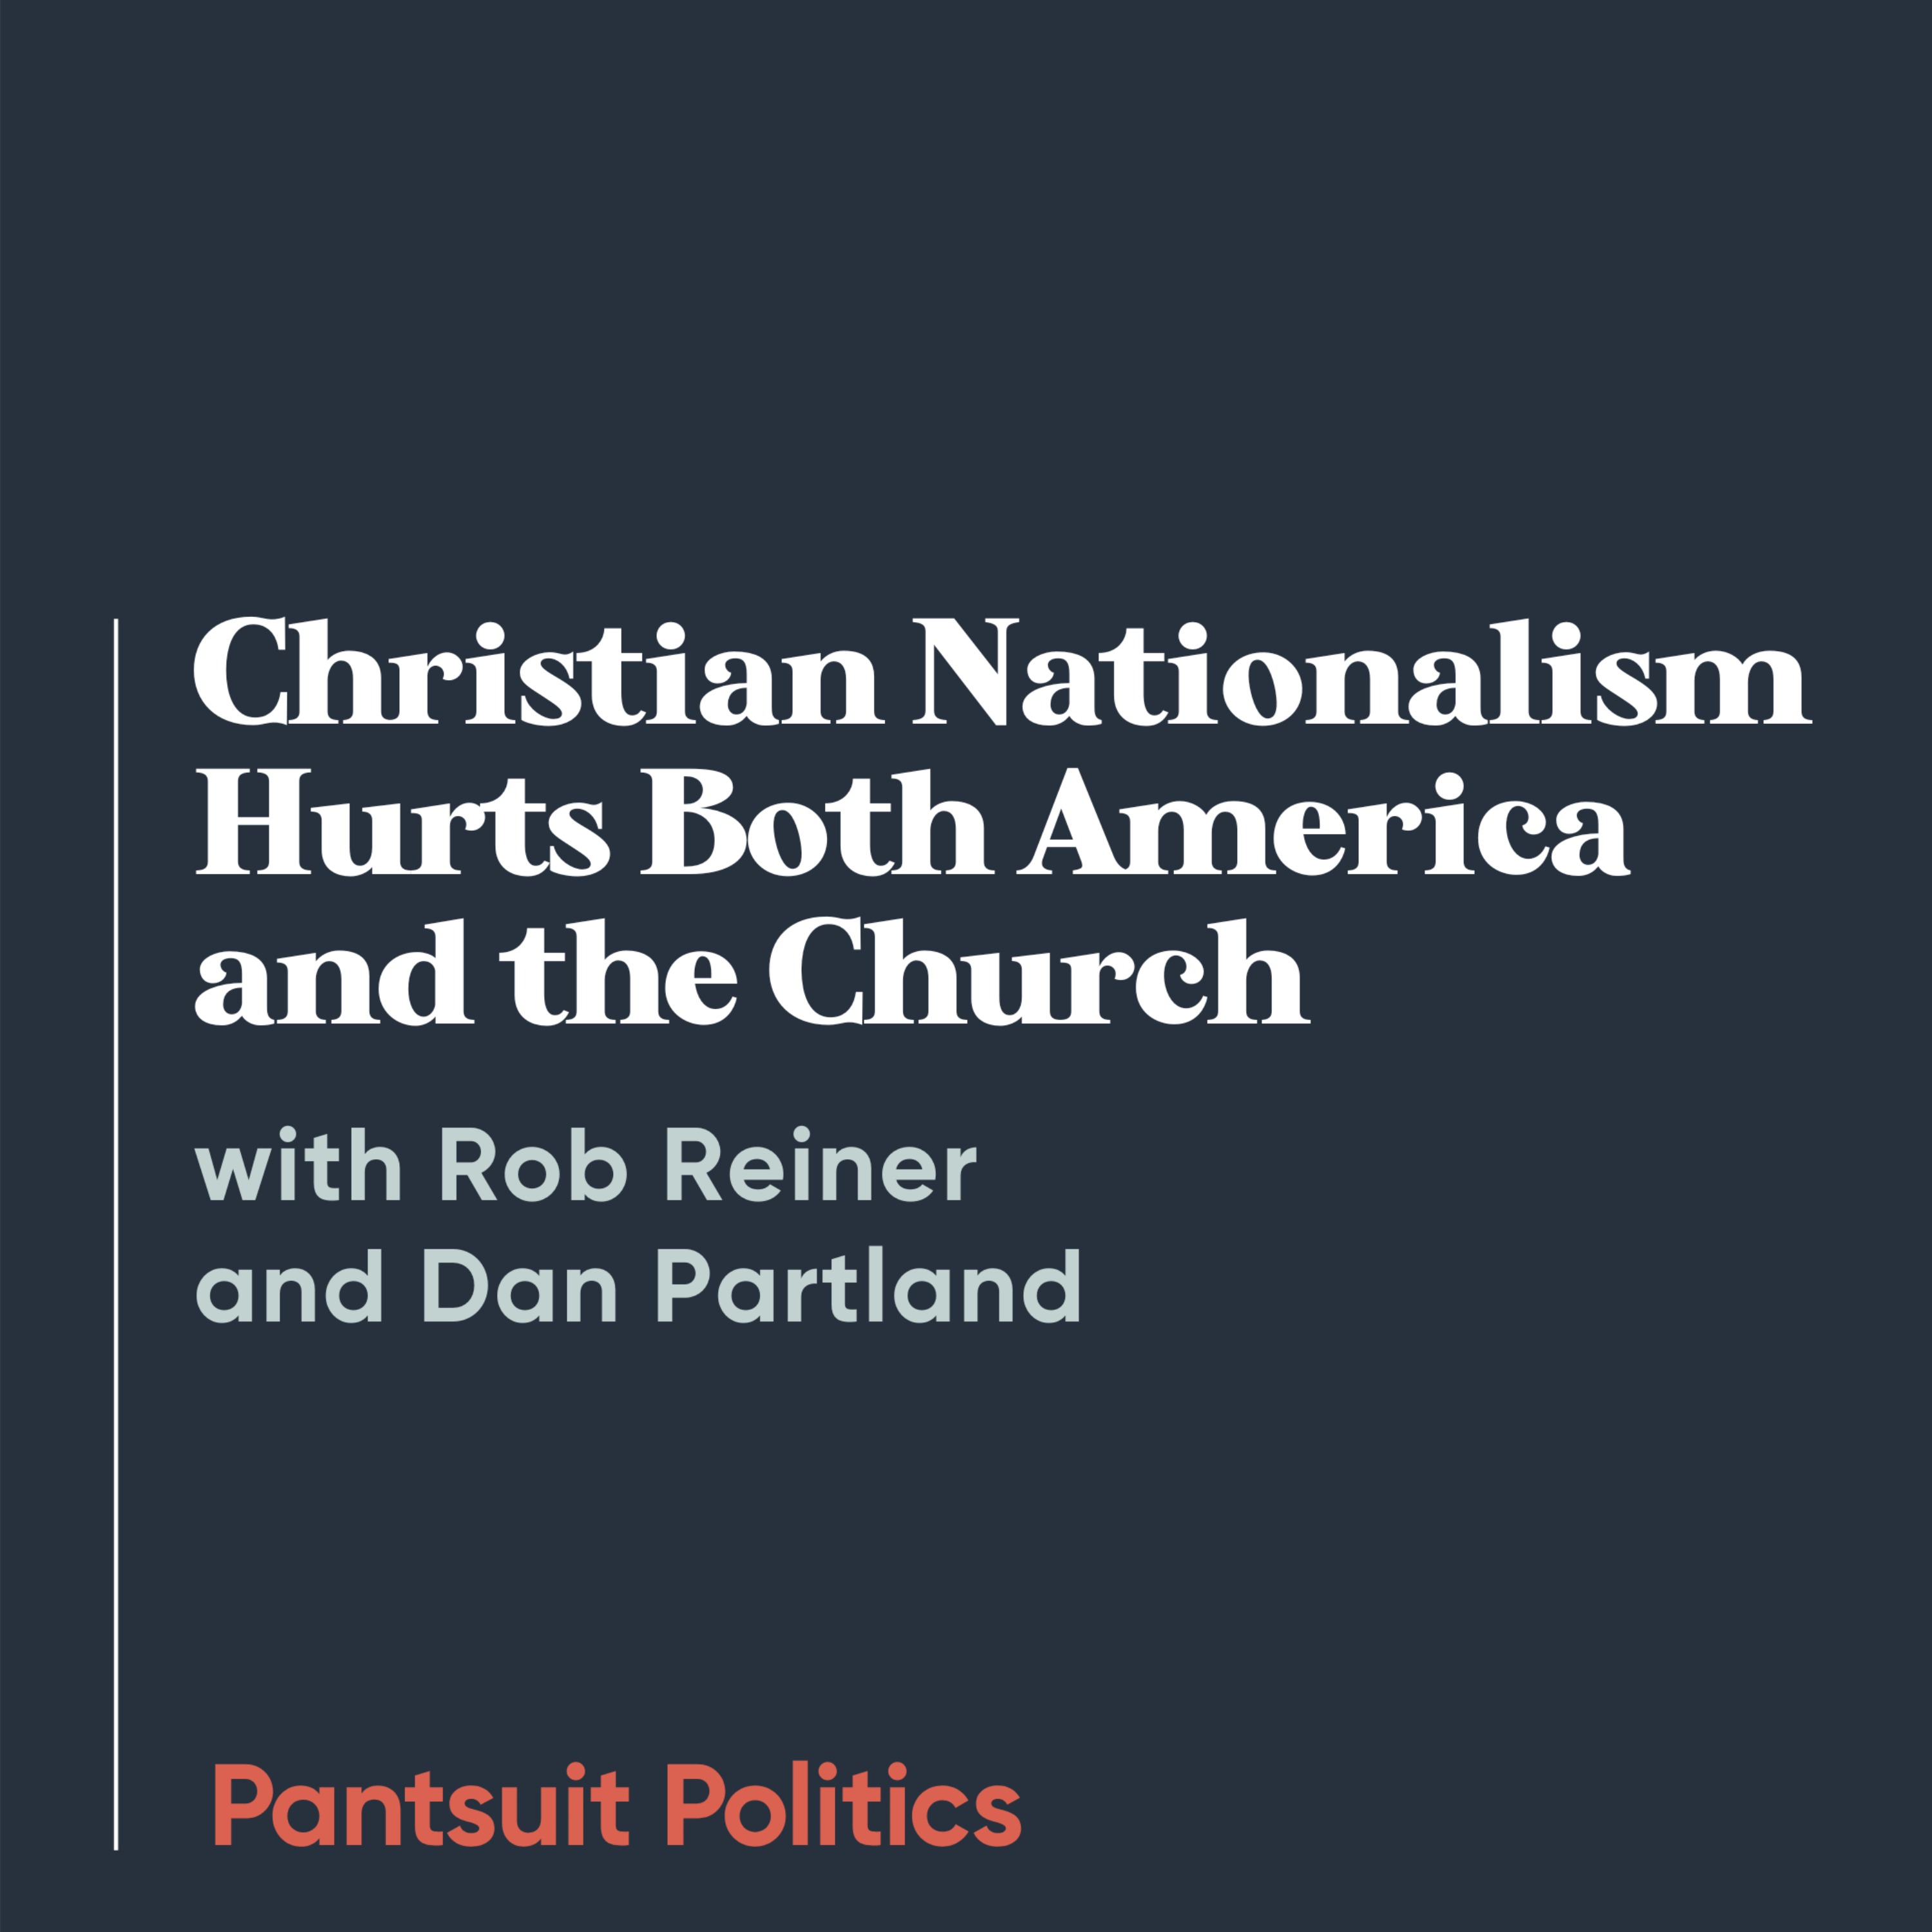 Christian Nationalism Hurts Both America and the Church with Rob Reiner